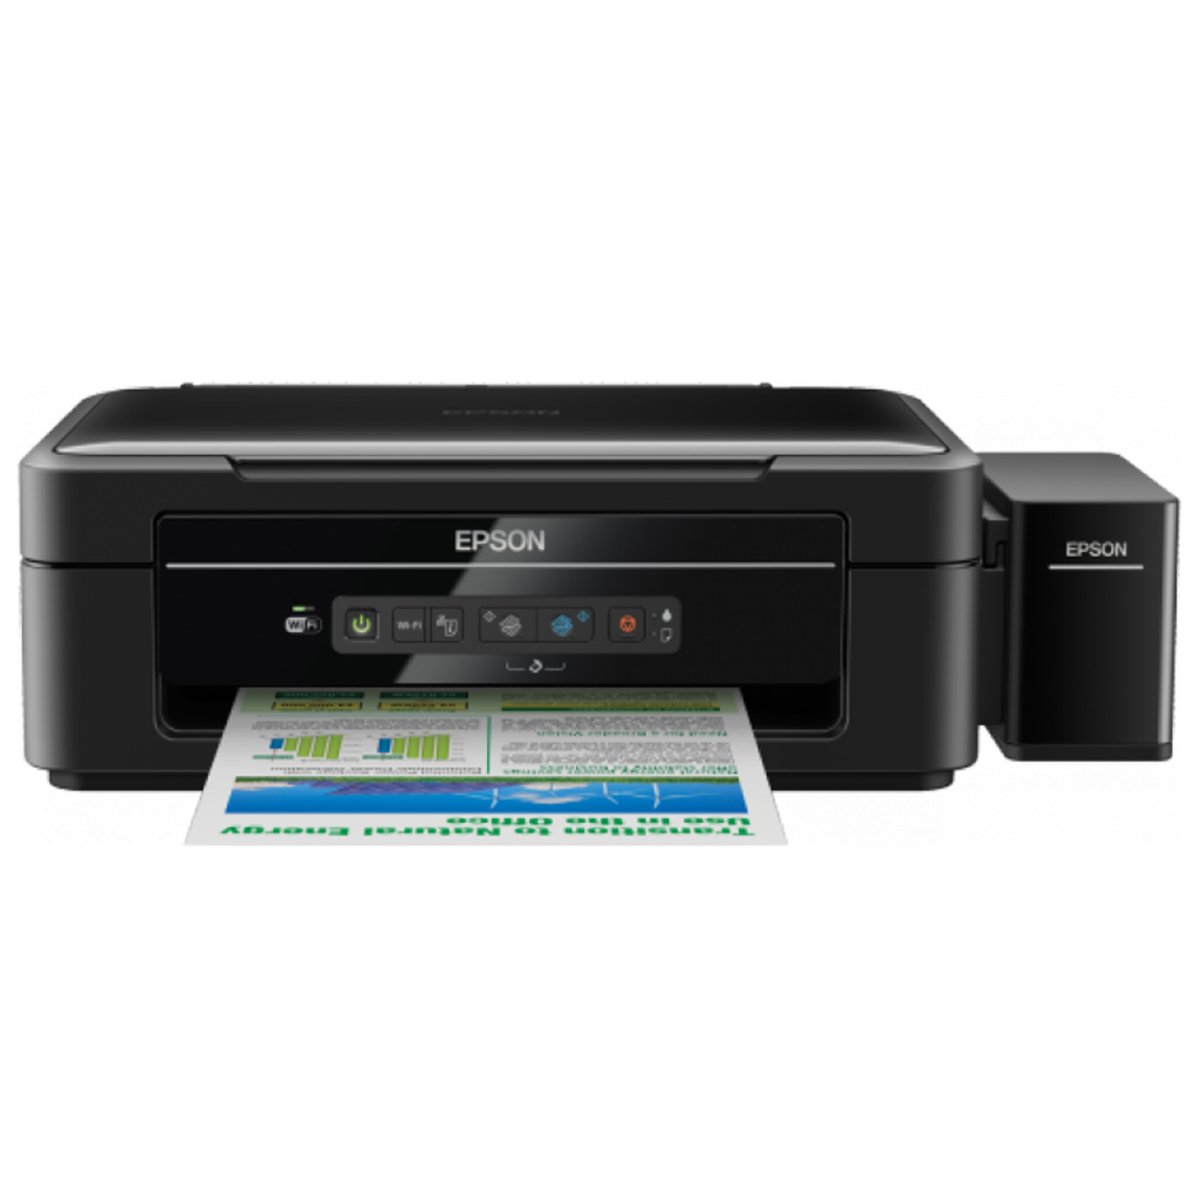 Epson Wireless All-in-One Printer L365